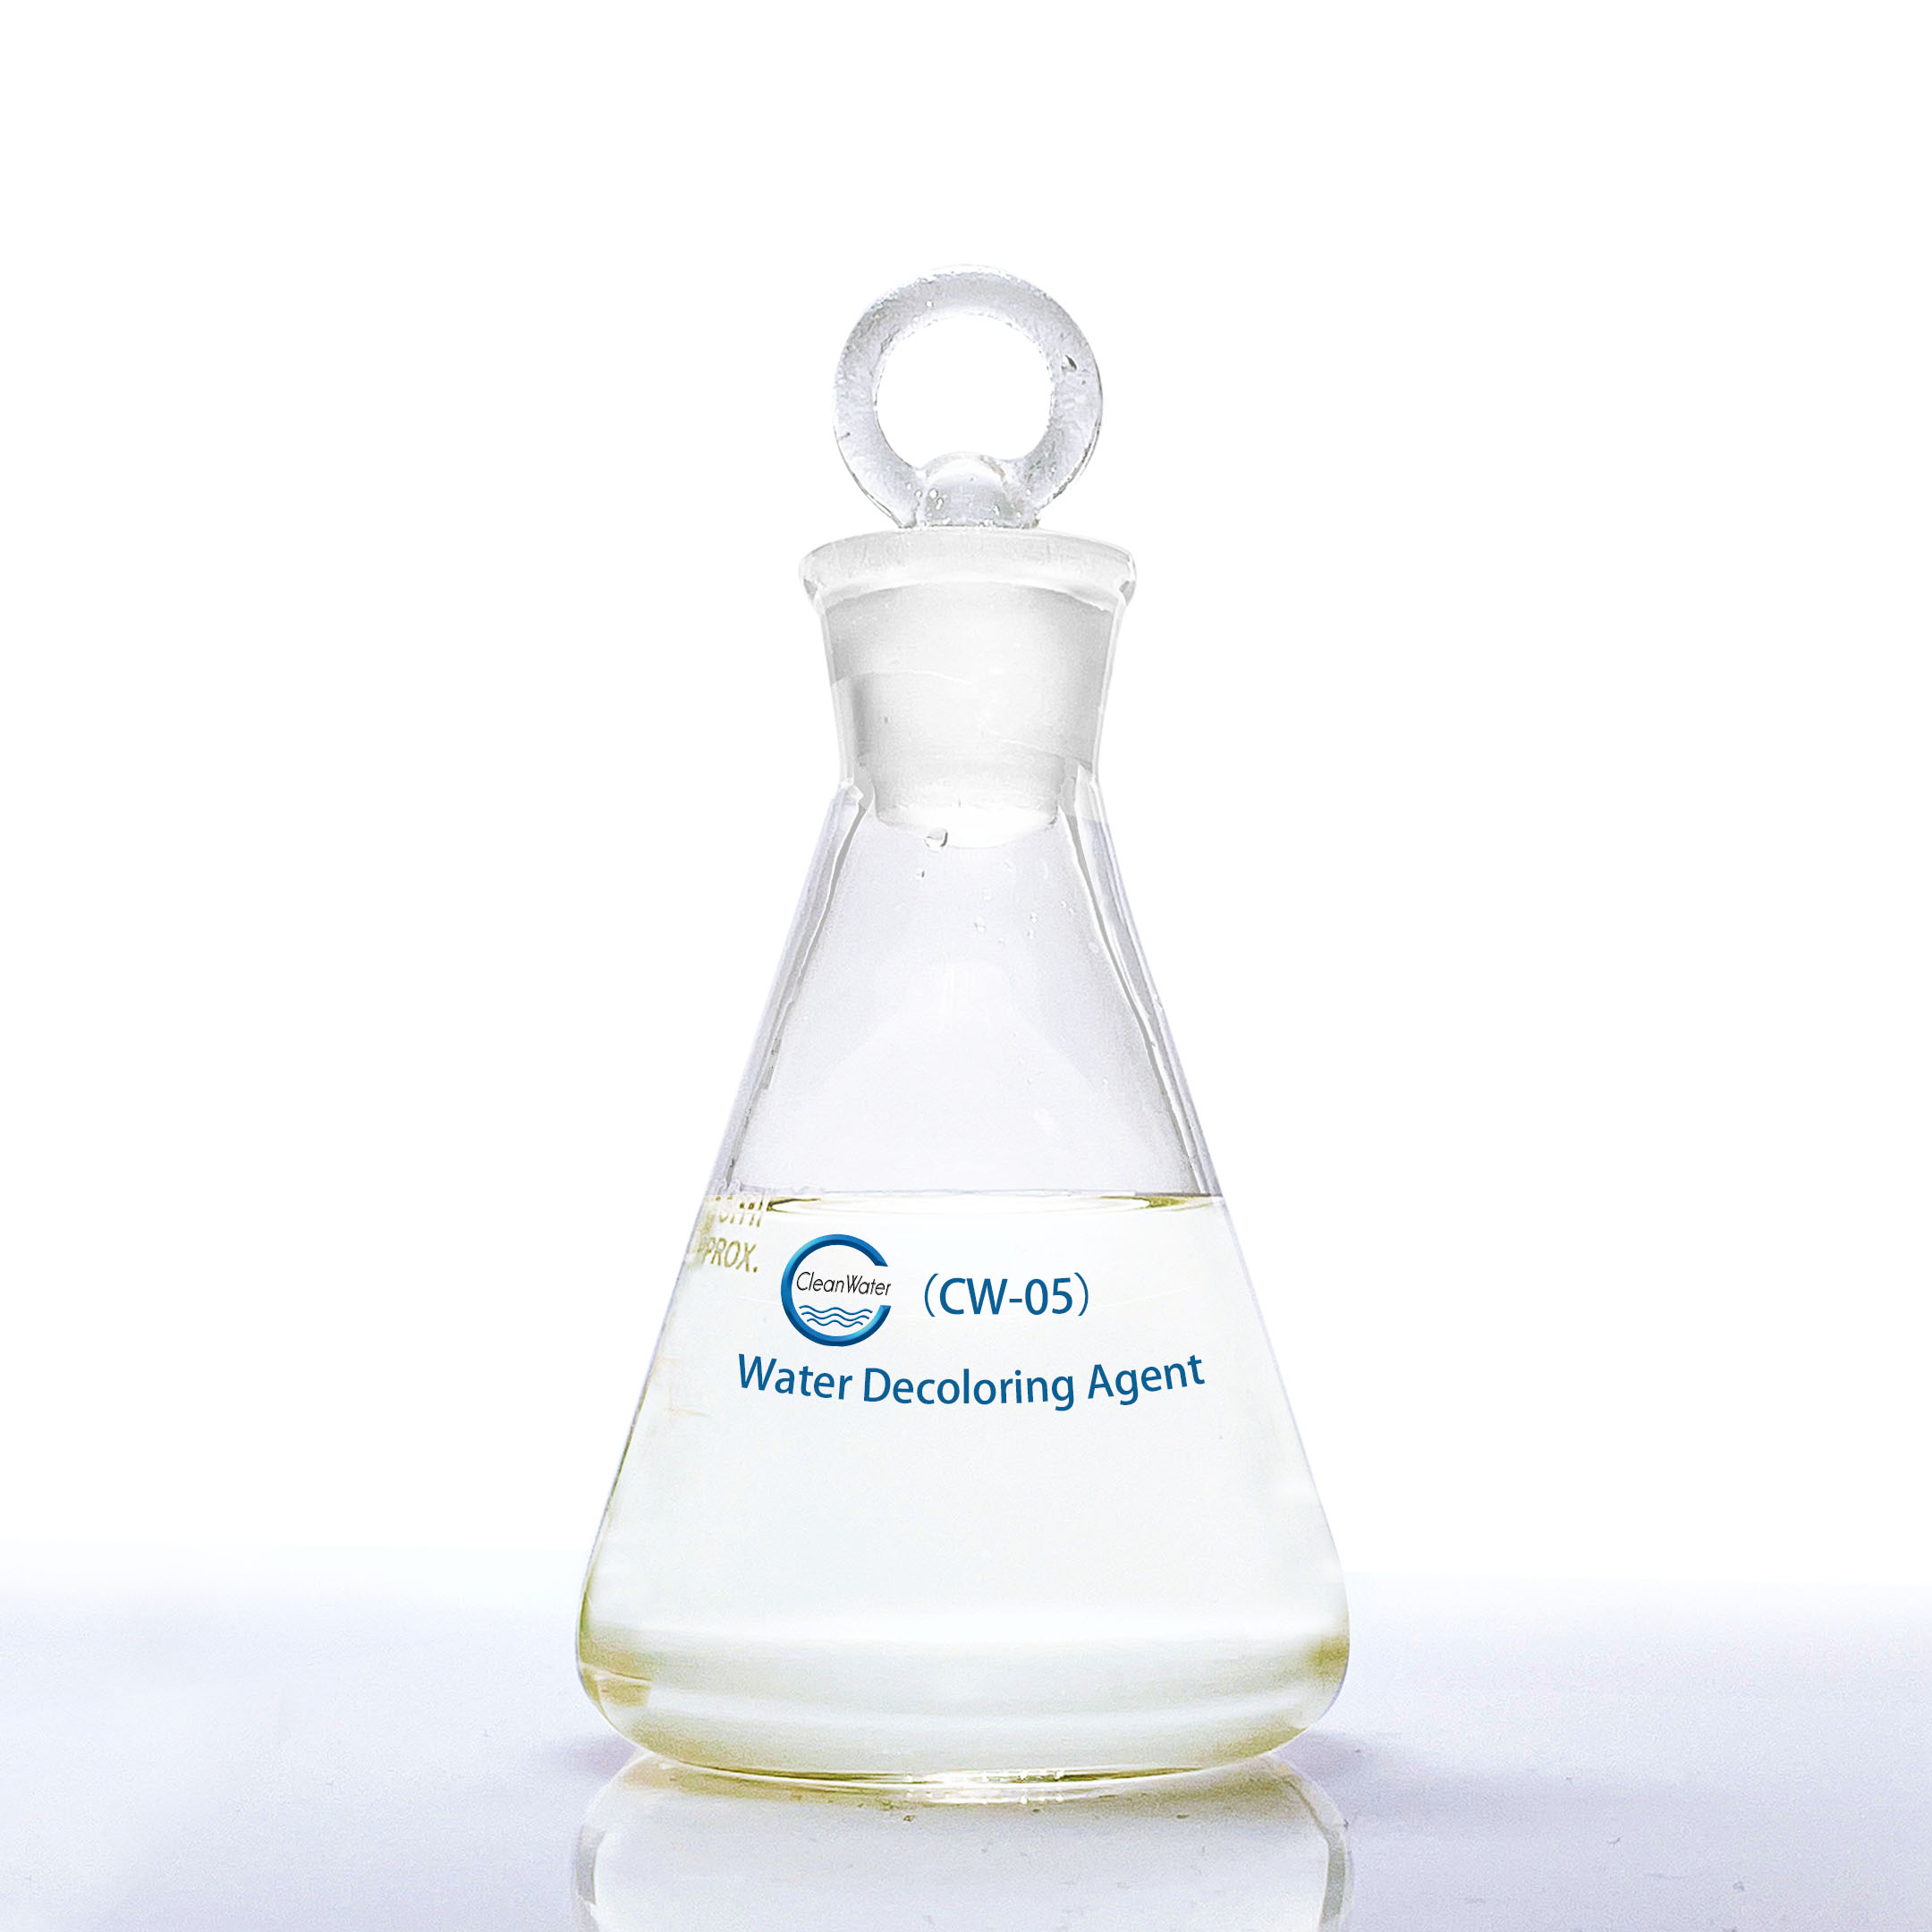 New Arrival China Textile Waste Water Chemical Exporters - Water Decoloring Agent CW-05 – Cleanwater